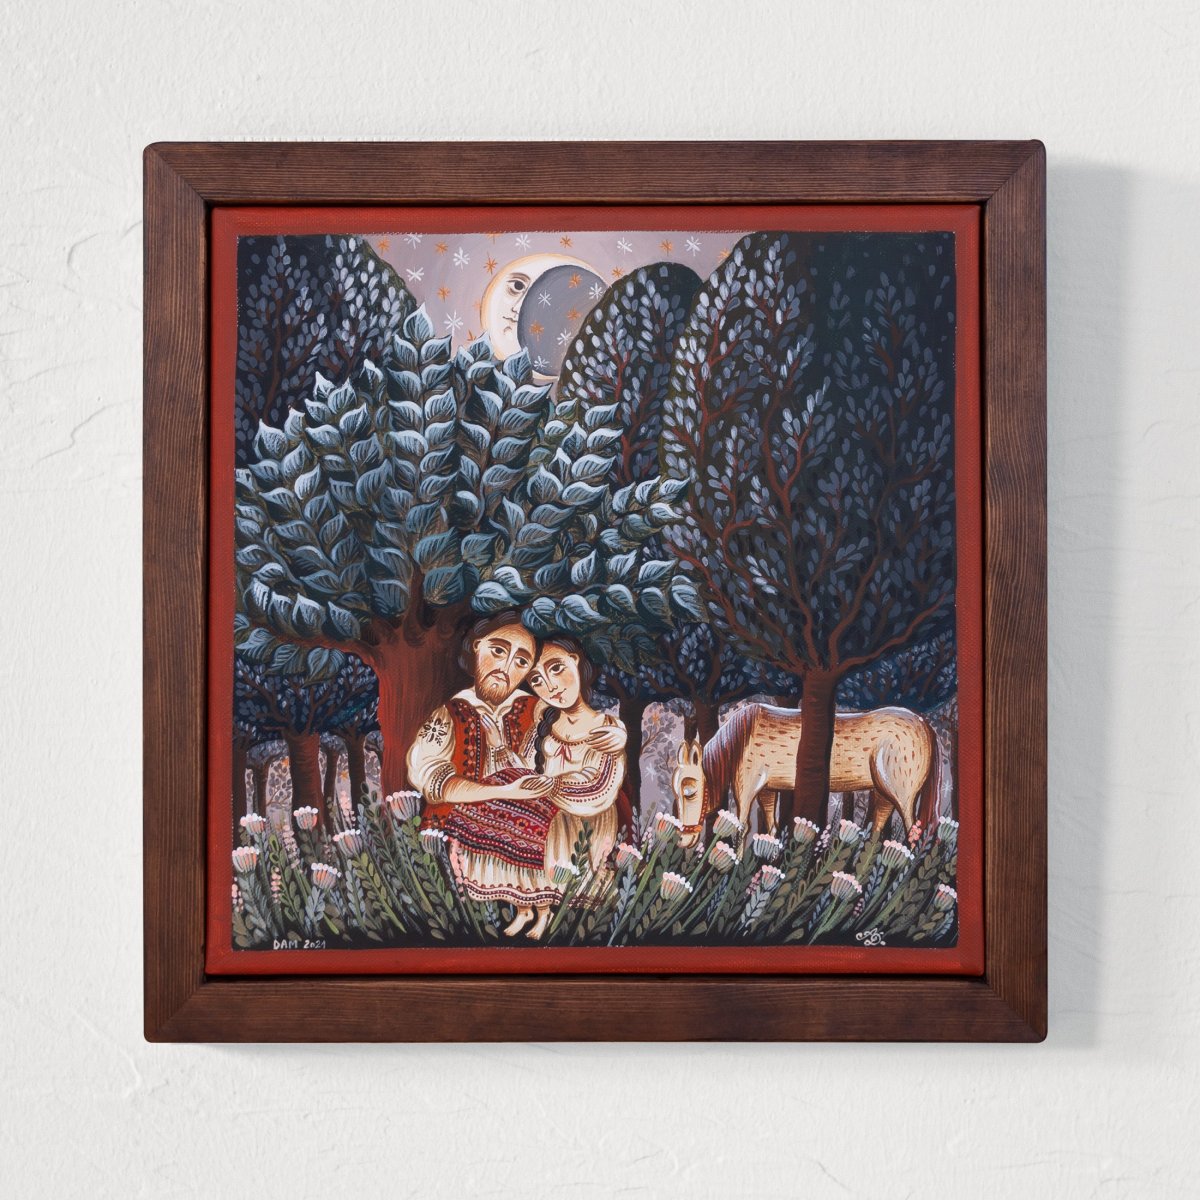 Canvas painting, "Away from the world", 30x30 cm, hand painted, wooden frame